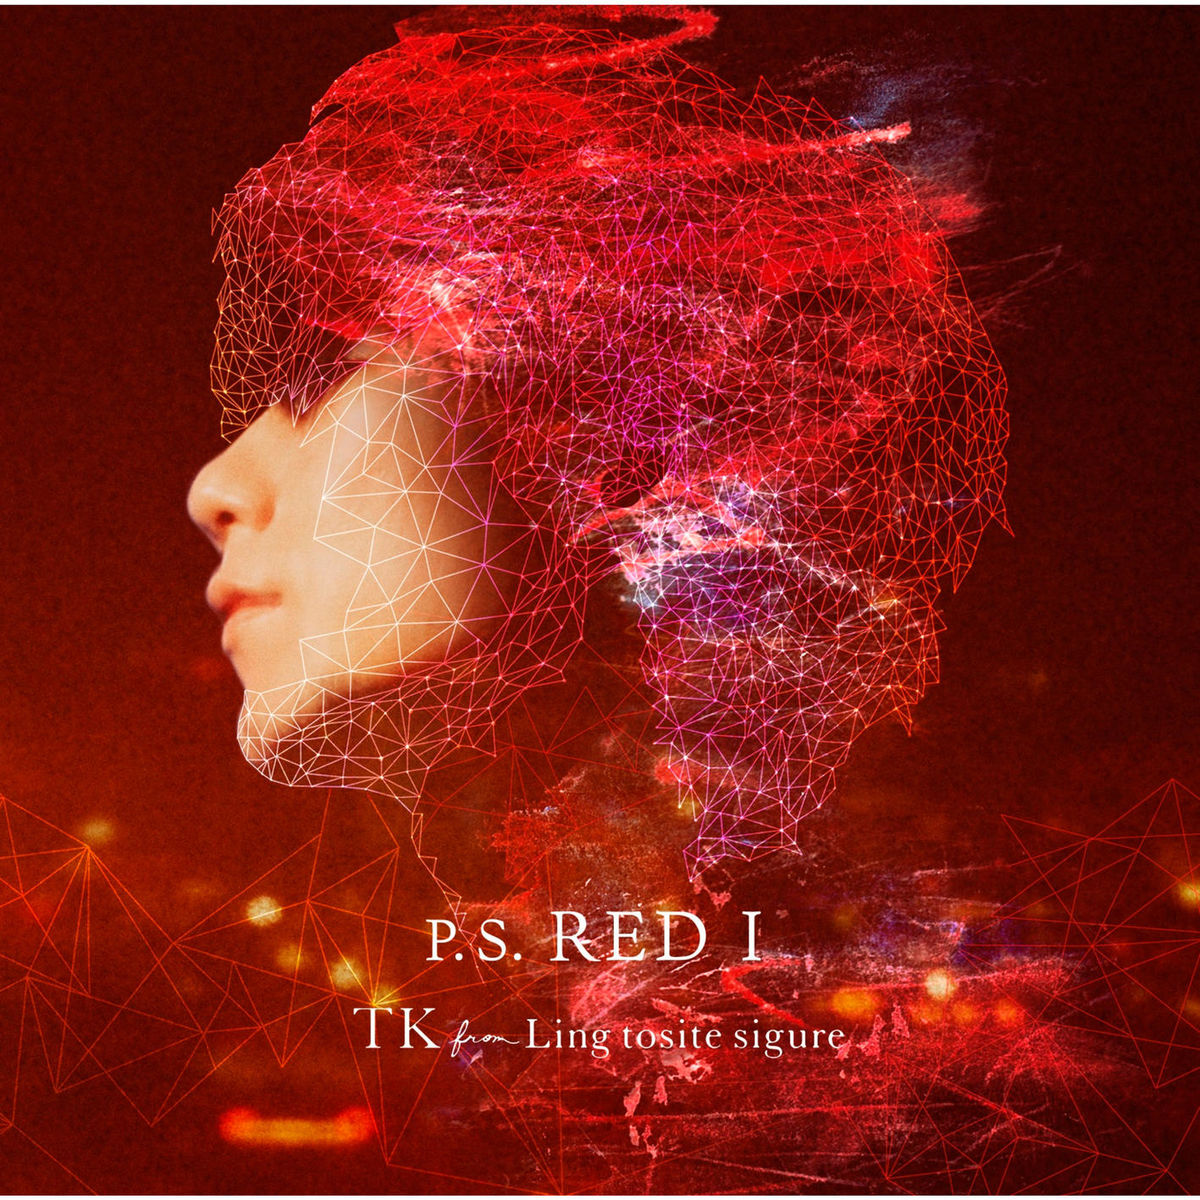 TK From Ling Tosite Sigure - P.S. RED I